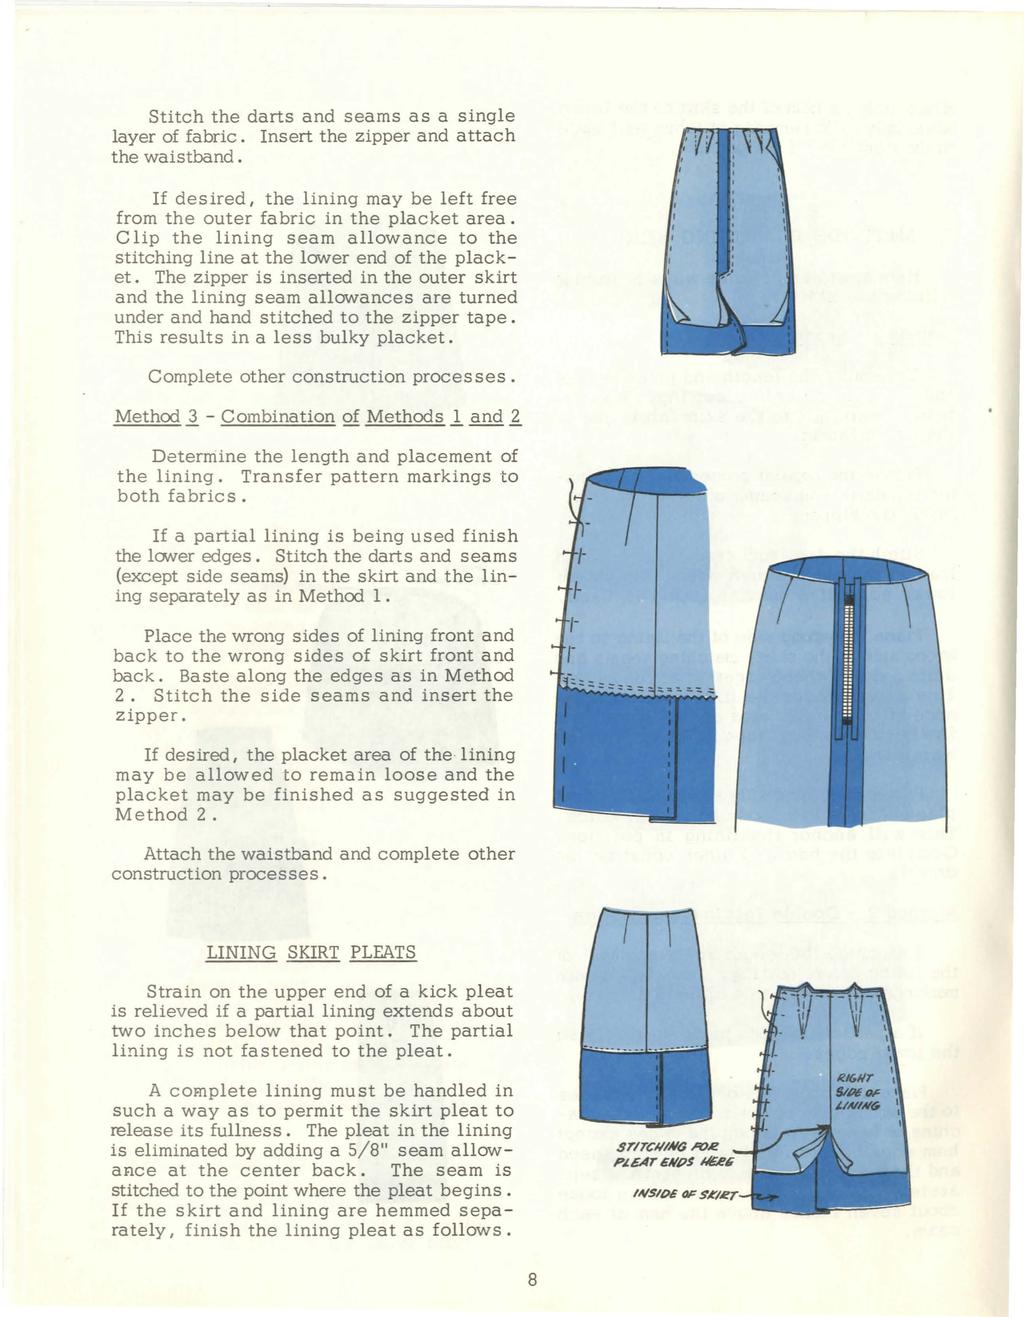 Stitch the darts and seams as a single layer of fabric. Insert the zipper and attach the waistband. If desired, the lining may be left free from the outer fabric in the placket area.